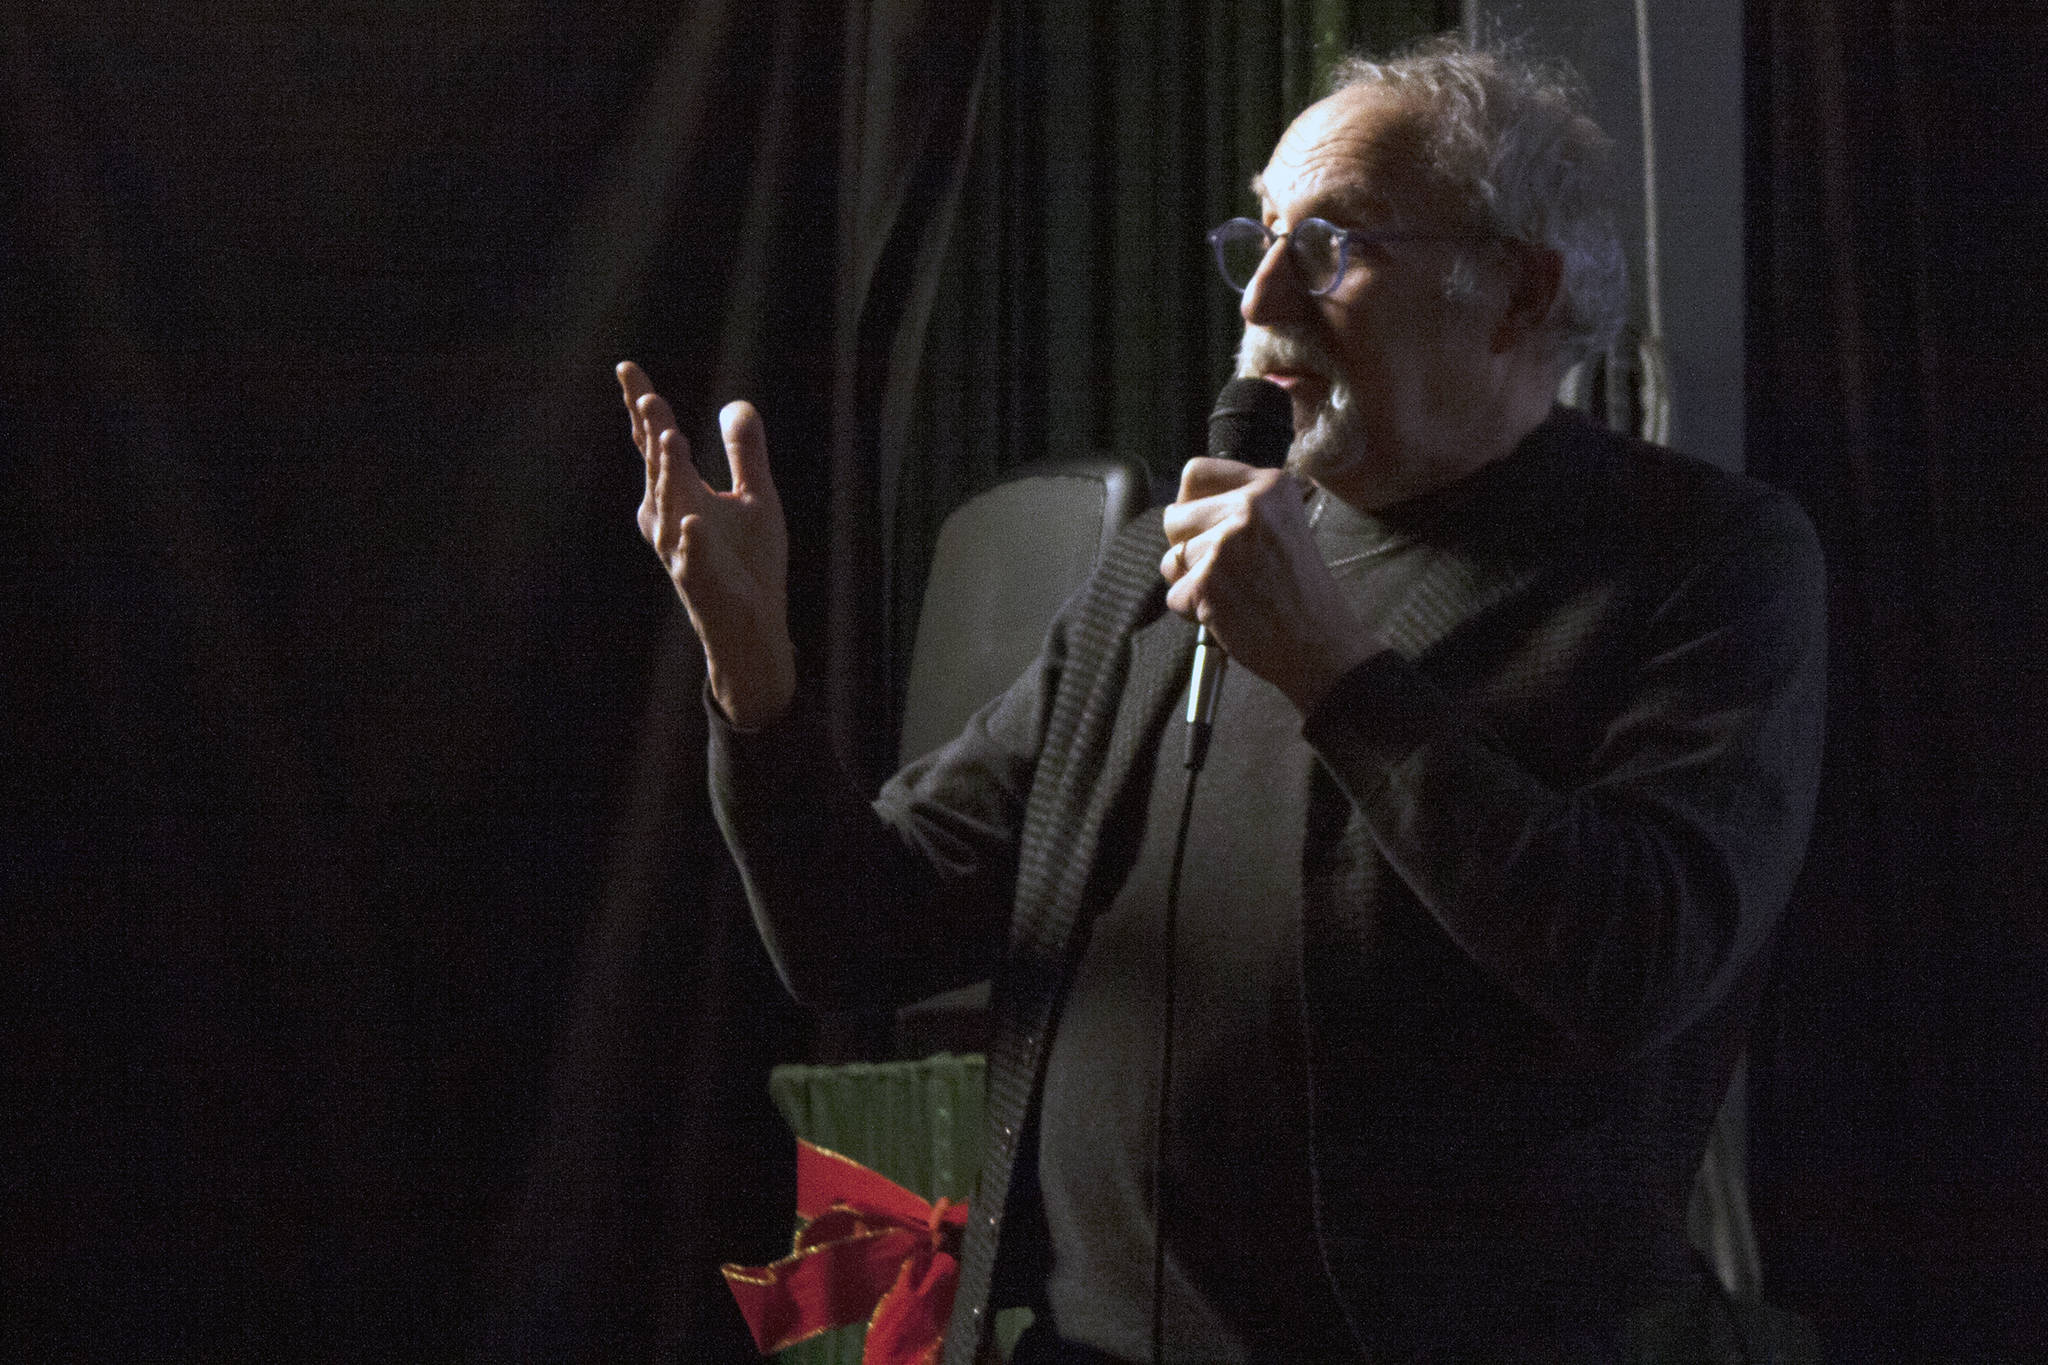 David George Gordon, a public speaker, naturalist and author known as the Bug Chef, speaks at the Gold Town Theater during a Science On Screen event Saturday, Jan. 18, 2020. (Ben Hohenstatt | Juneau Empire)